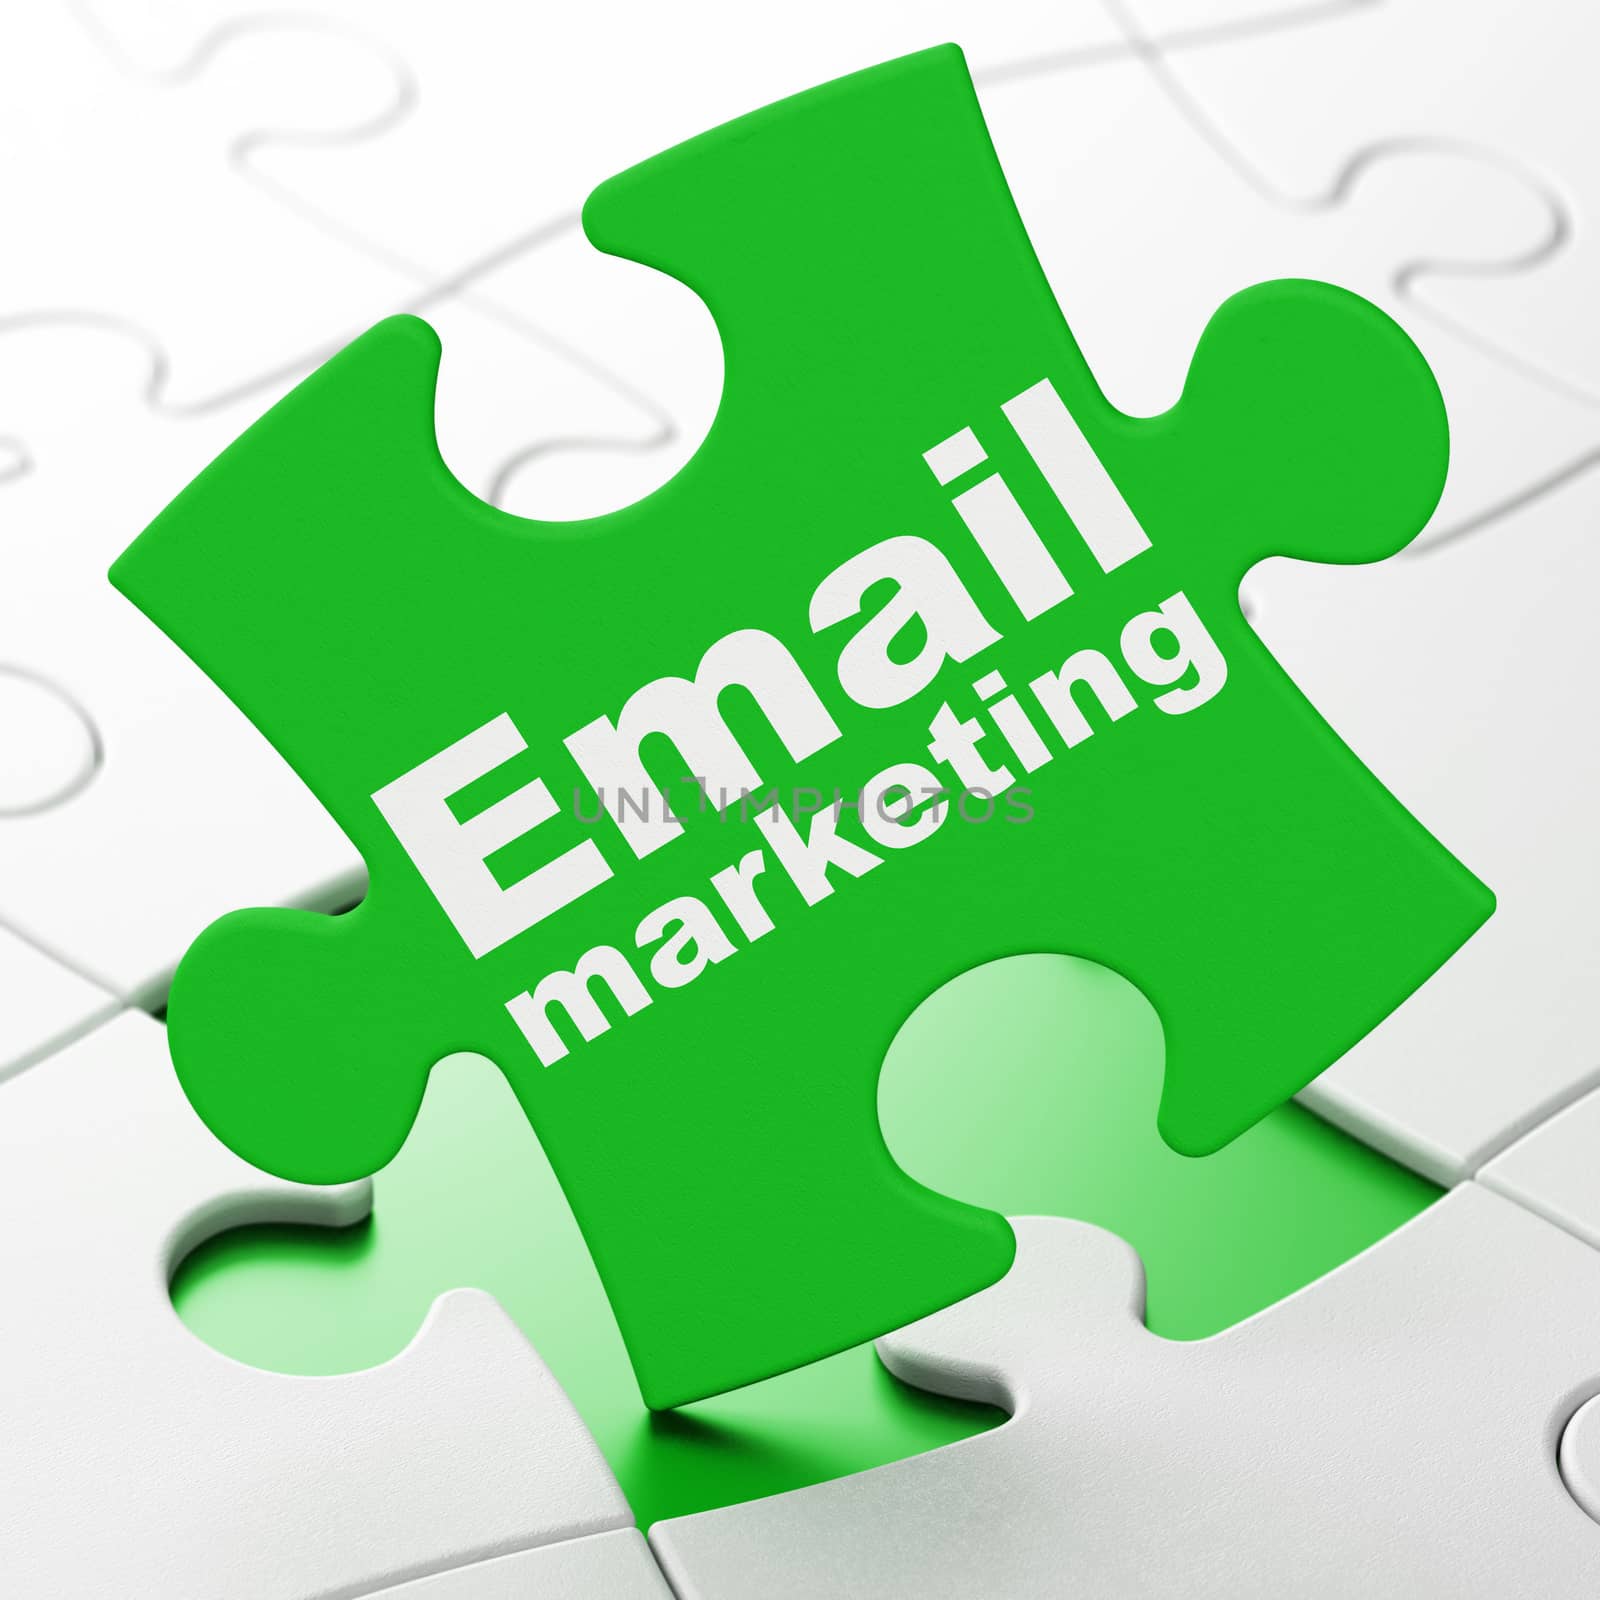 Business concept: Email Marketing on Green puzzle pieces background, 3d render